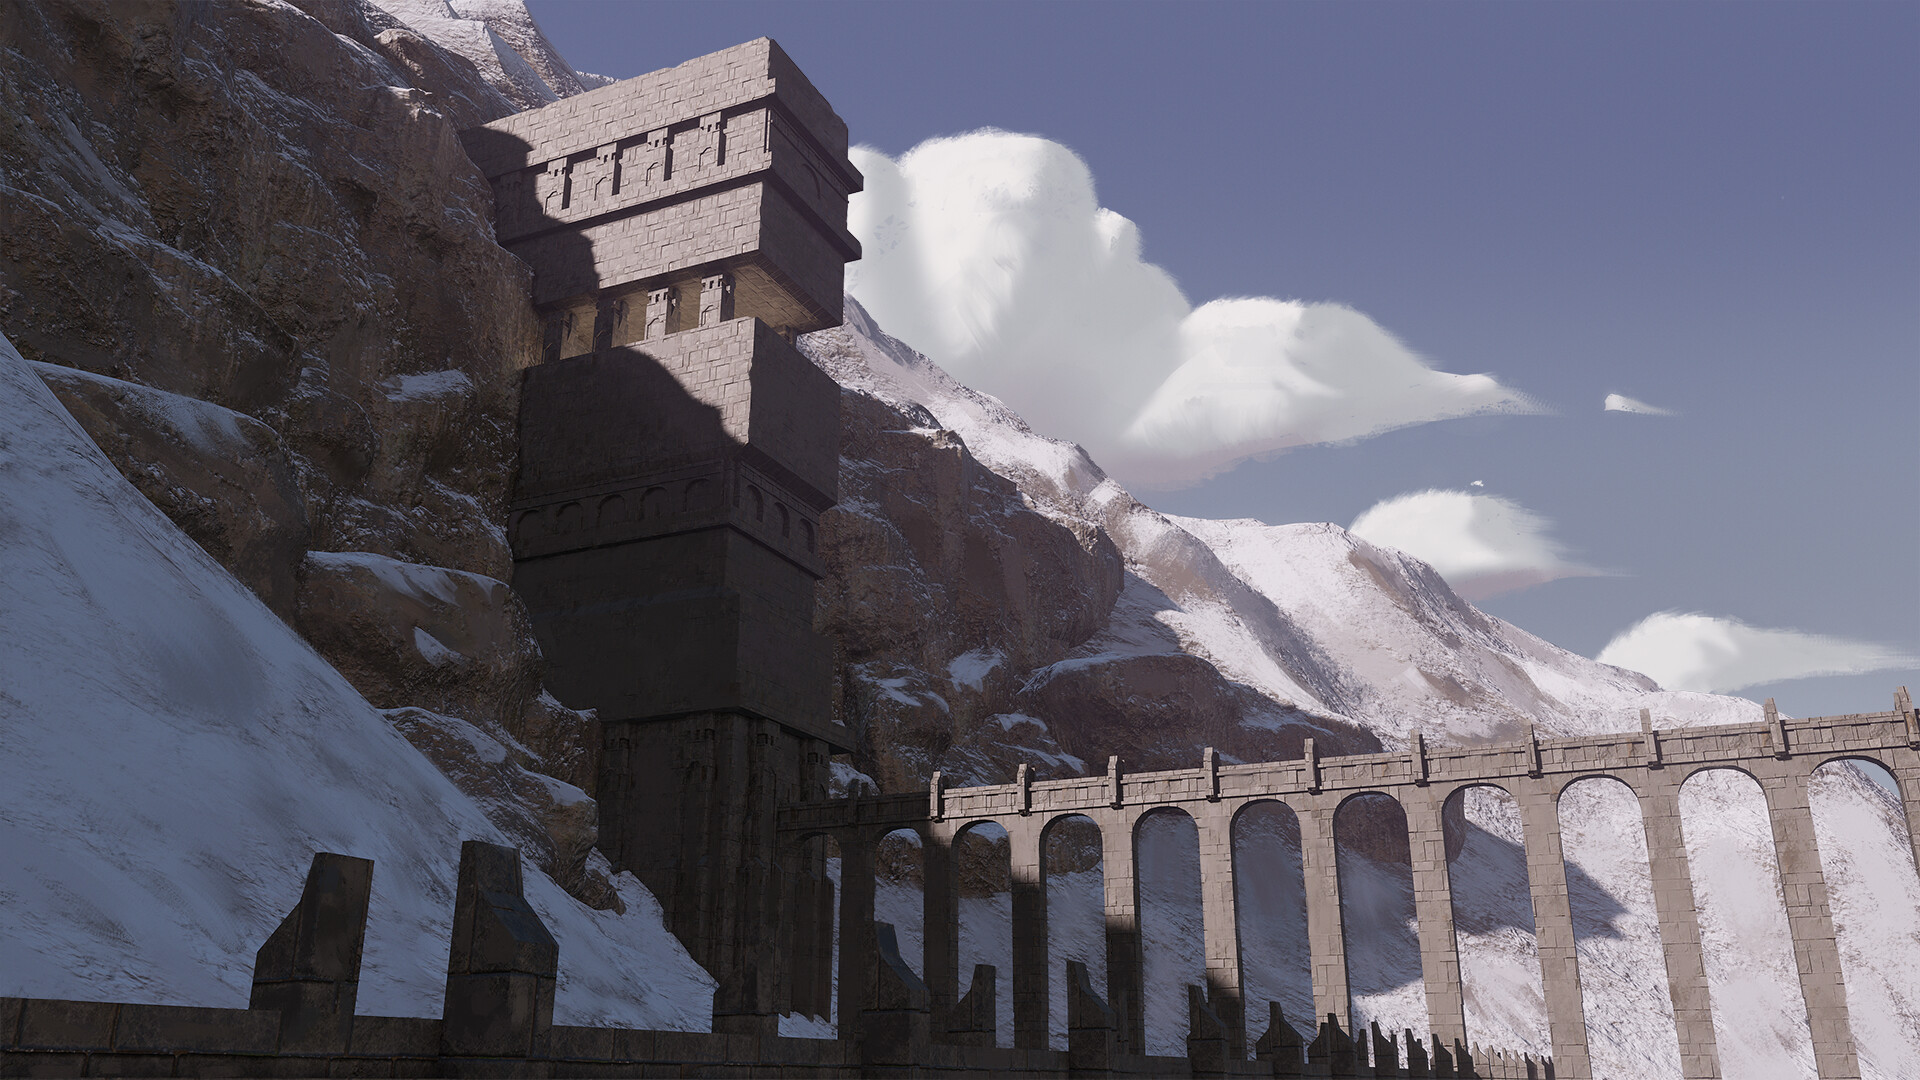 Illustration showing a large stone structure protruding from a snow-covered mountain. A long bridge extends from the structure, leading out of the frame.